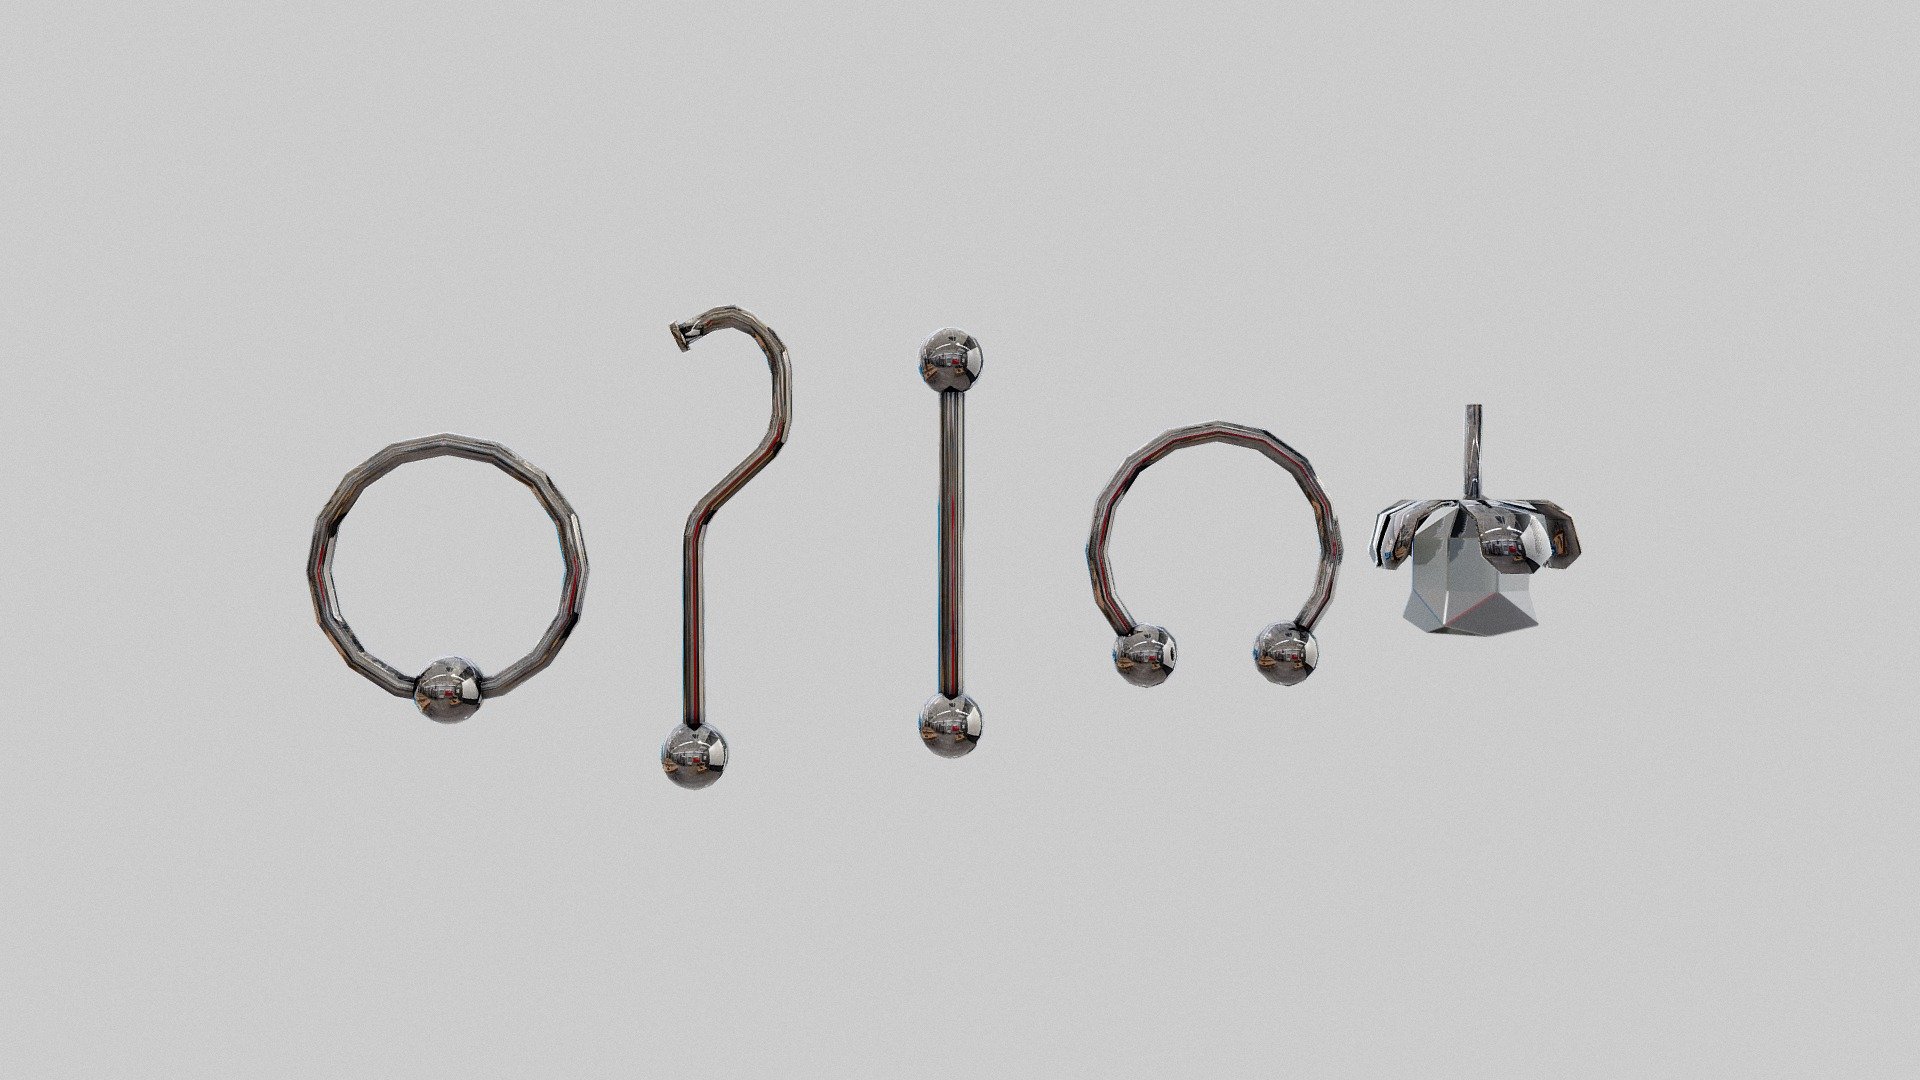 Piercing pack modeled in Blender and textured in Substance Painter.

Includes 4096 x 4096 metallic textures 3d model